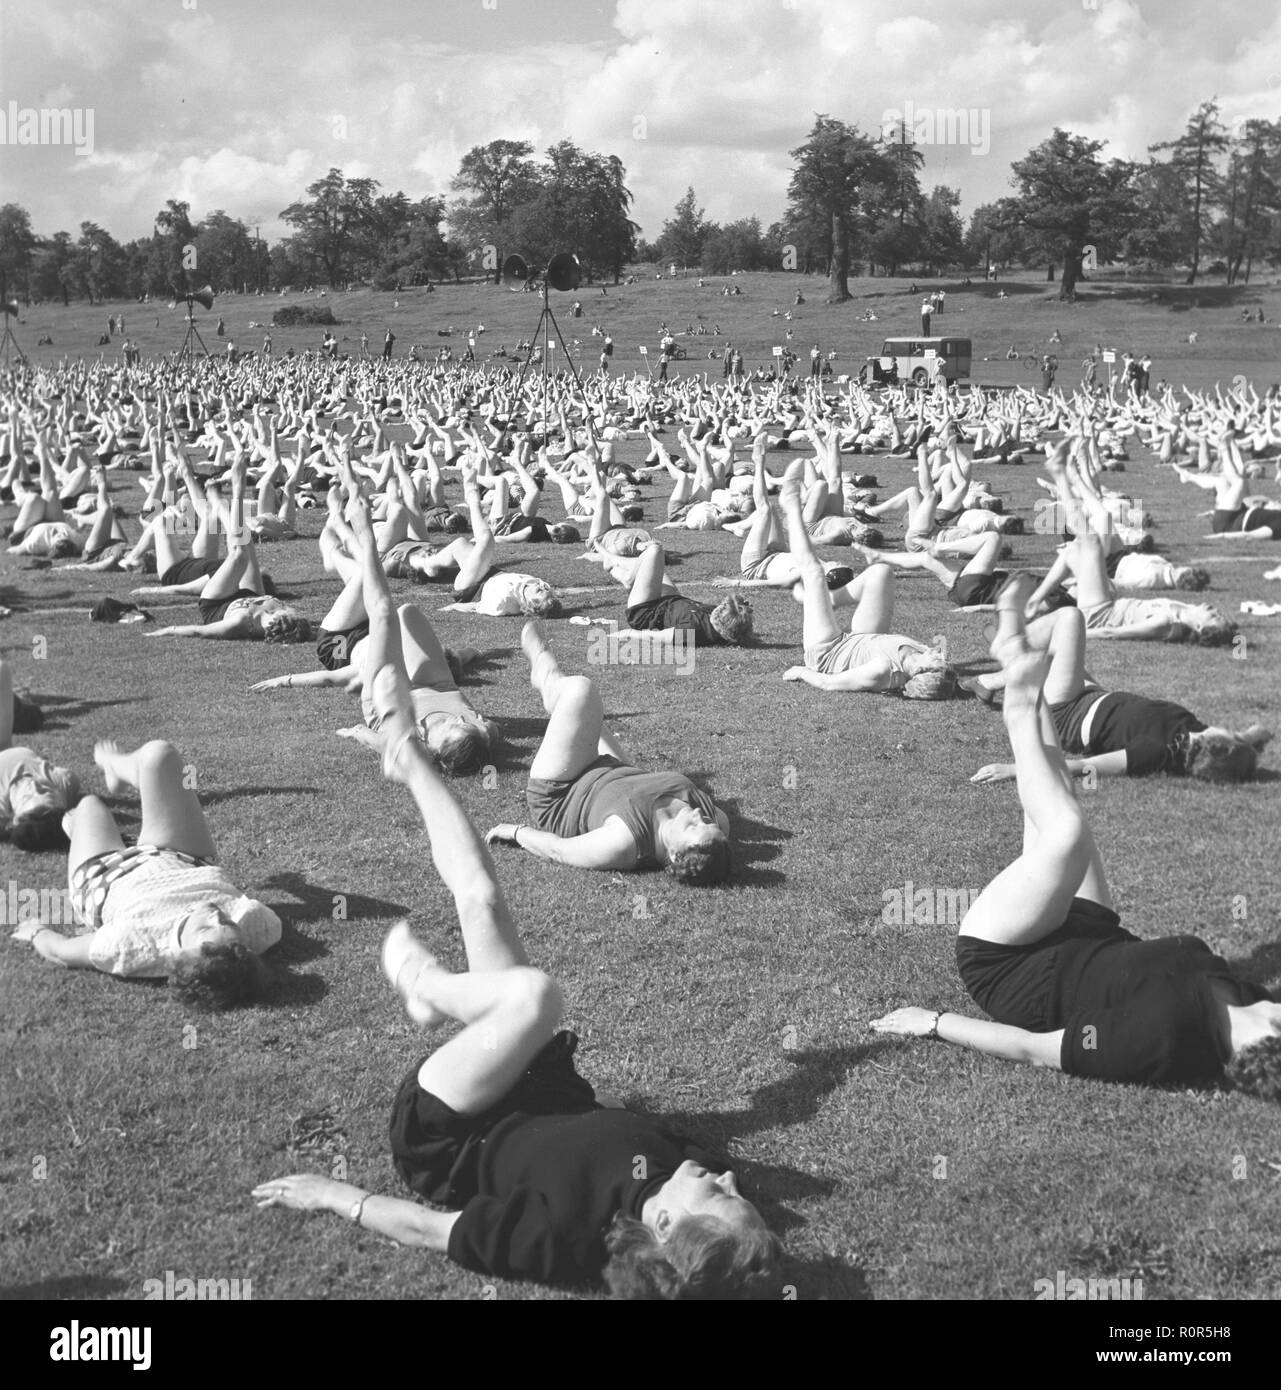 Gymnastics in the 1950s. The popular womens housewife gymnastics is being practiced everywhere. Here a large number of women are exercising together outdoors. Sweden 1954 Stock Photo